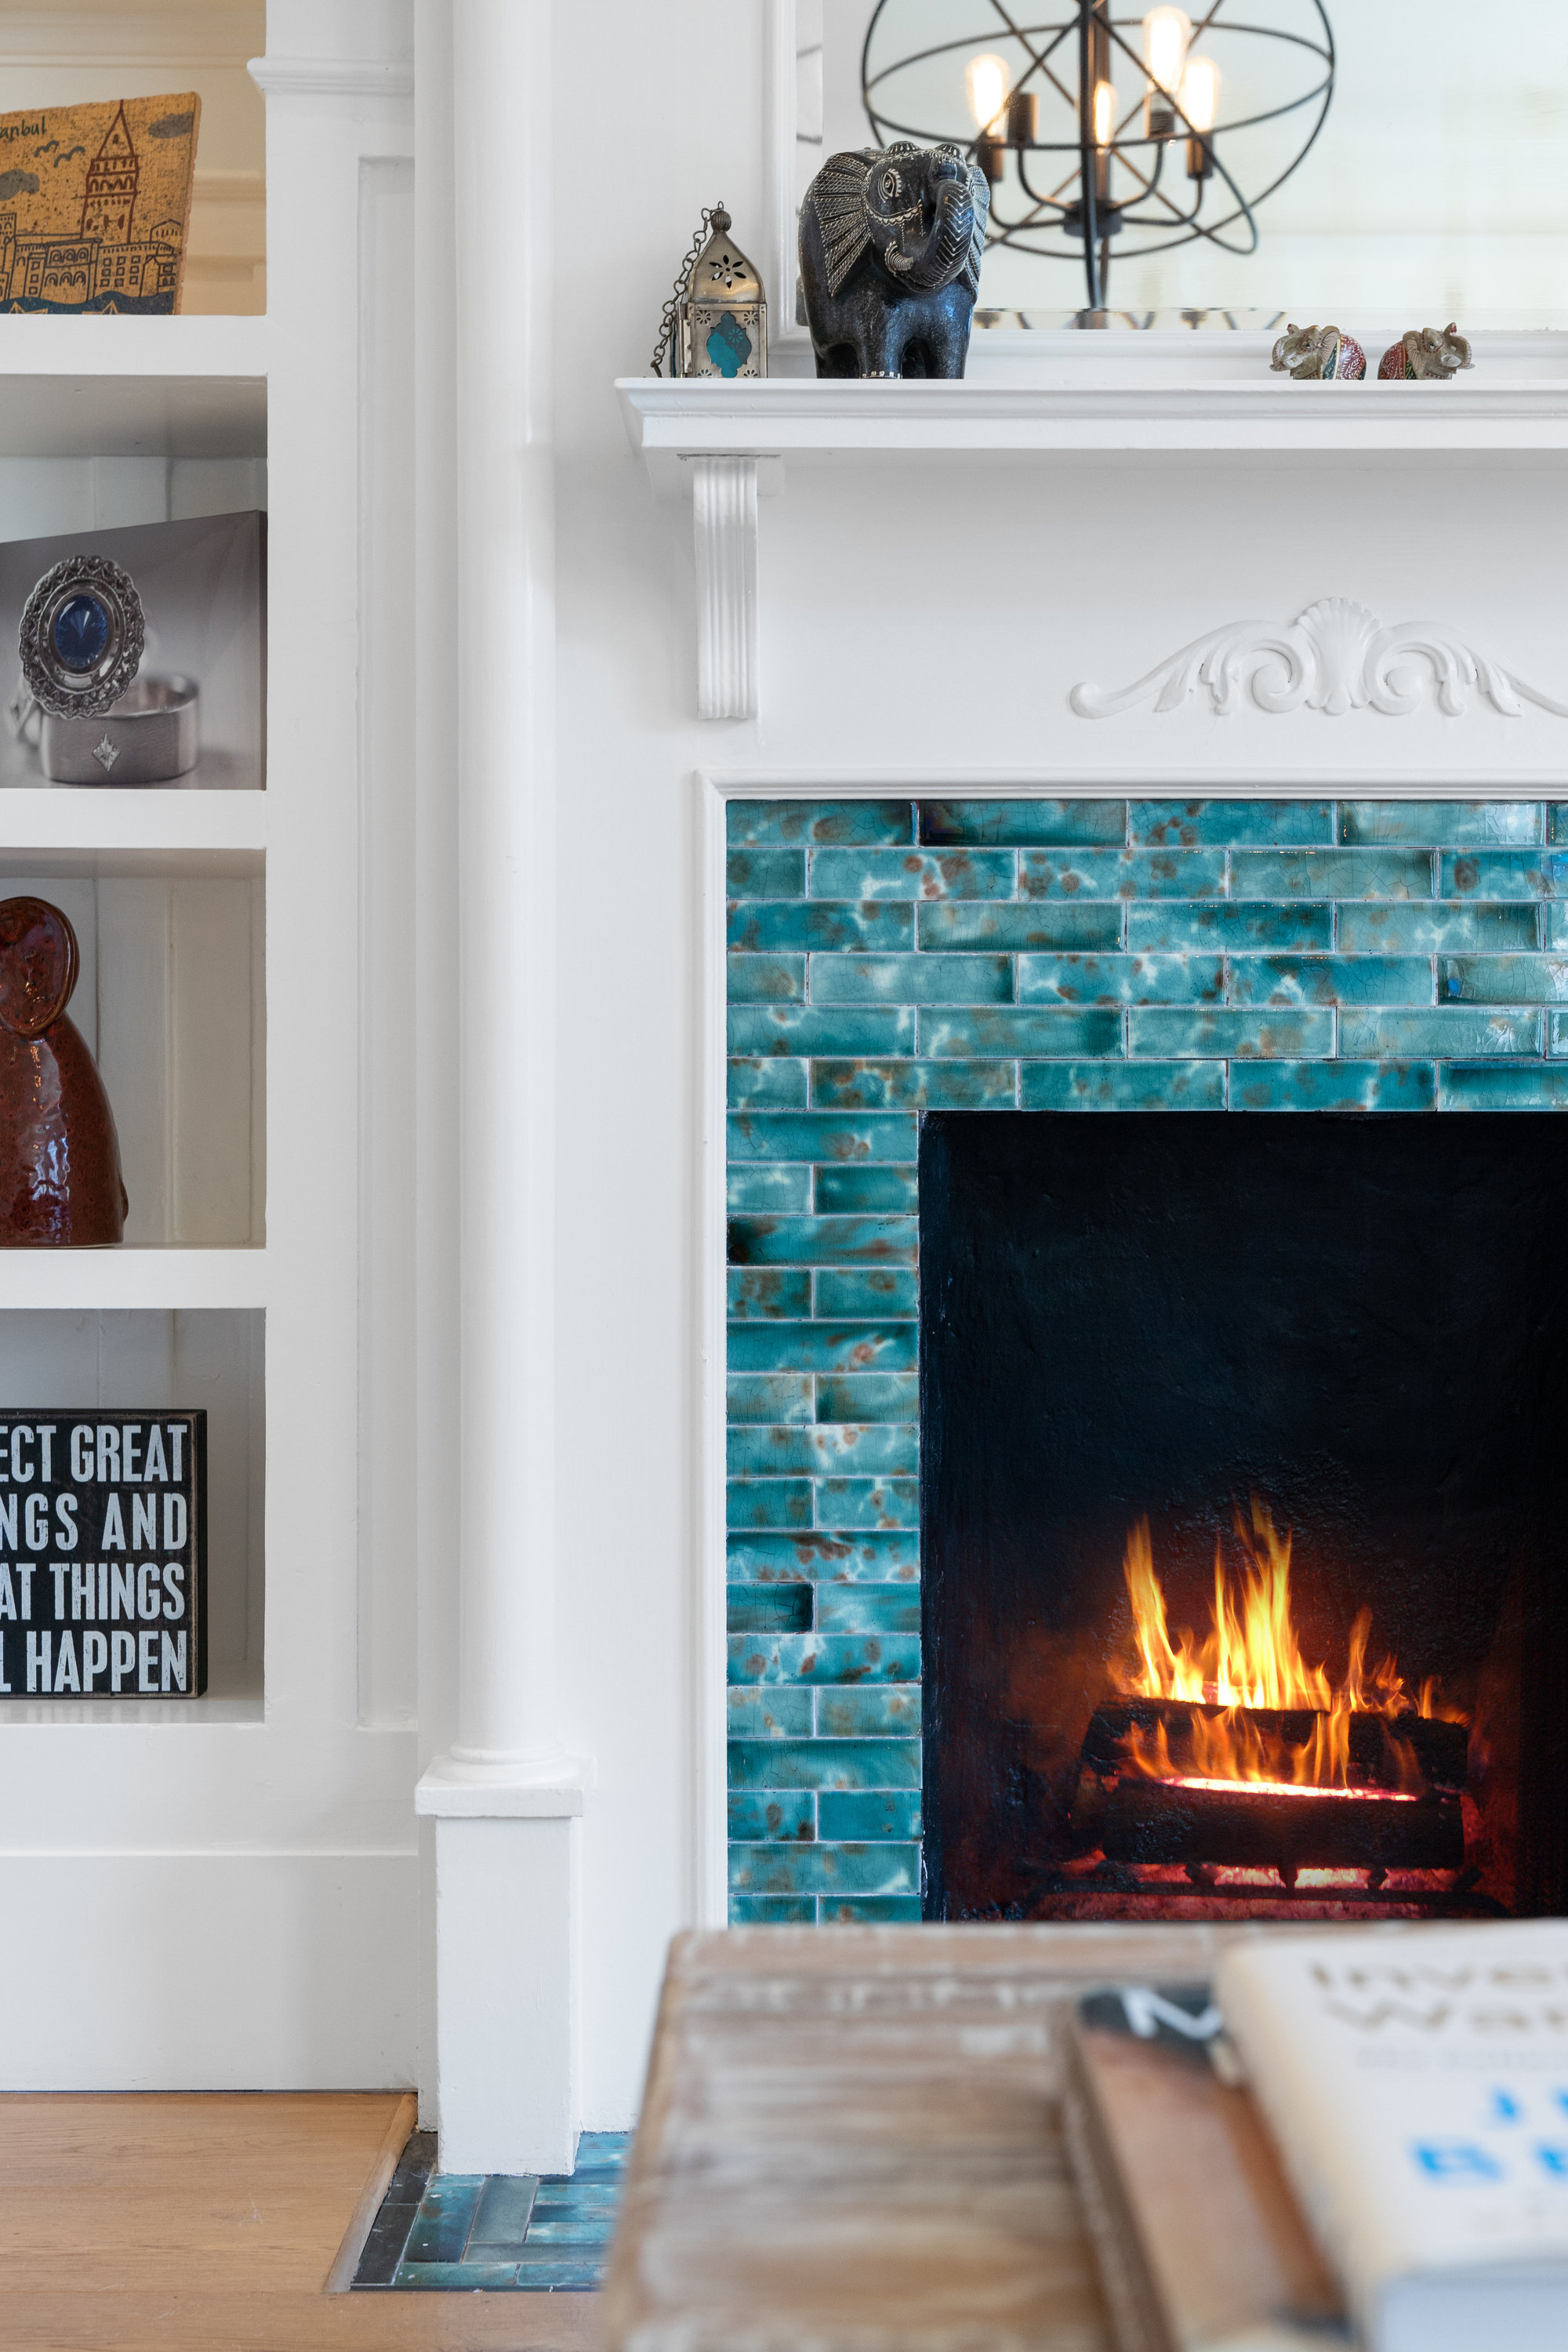 Property Photo: Close-up view of the turquoise tile and wood mantle surrounding the fireplace